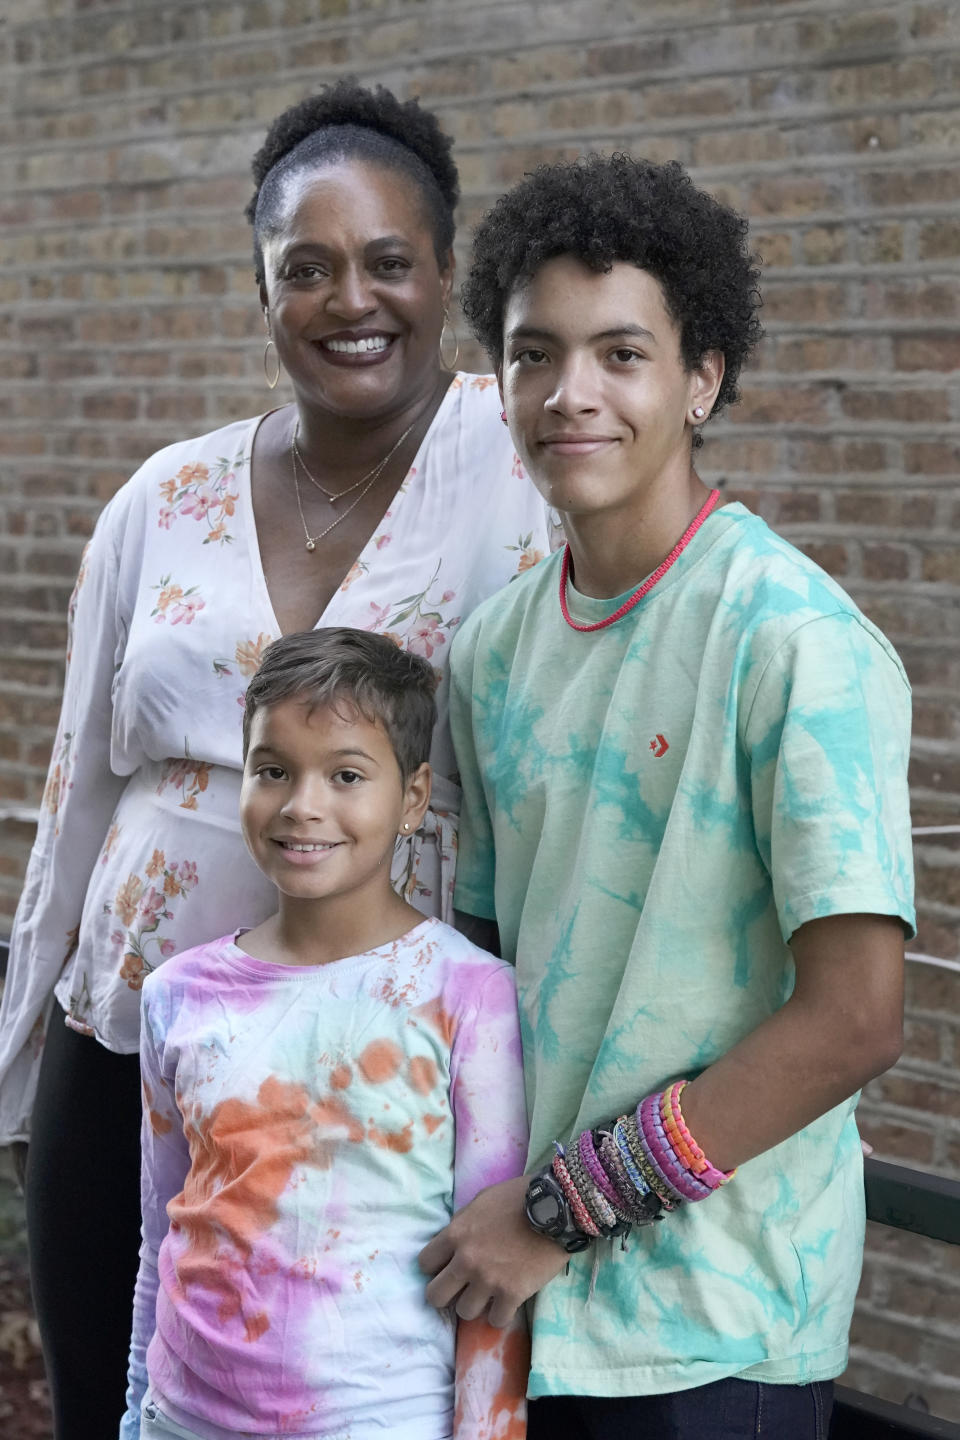 Marla Williams, left, her daughter Mariella Fallon, center, and son Miles Fallon, stand for portrait outside their Chicago home Wednesday, Oct. 12, 2022. Williams initially supported the Chicago Public Schools decision to instruct students online during the fall of 2020. Williams, a single mother, has asthma, as do her two children. While she was working, she enlisted her father, a retired teacher, to supervise her children’s studies. (AP Photo/Charles Rex Arbogast)